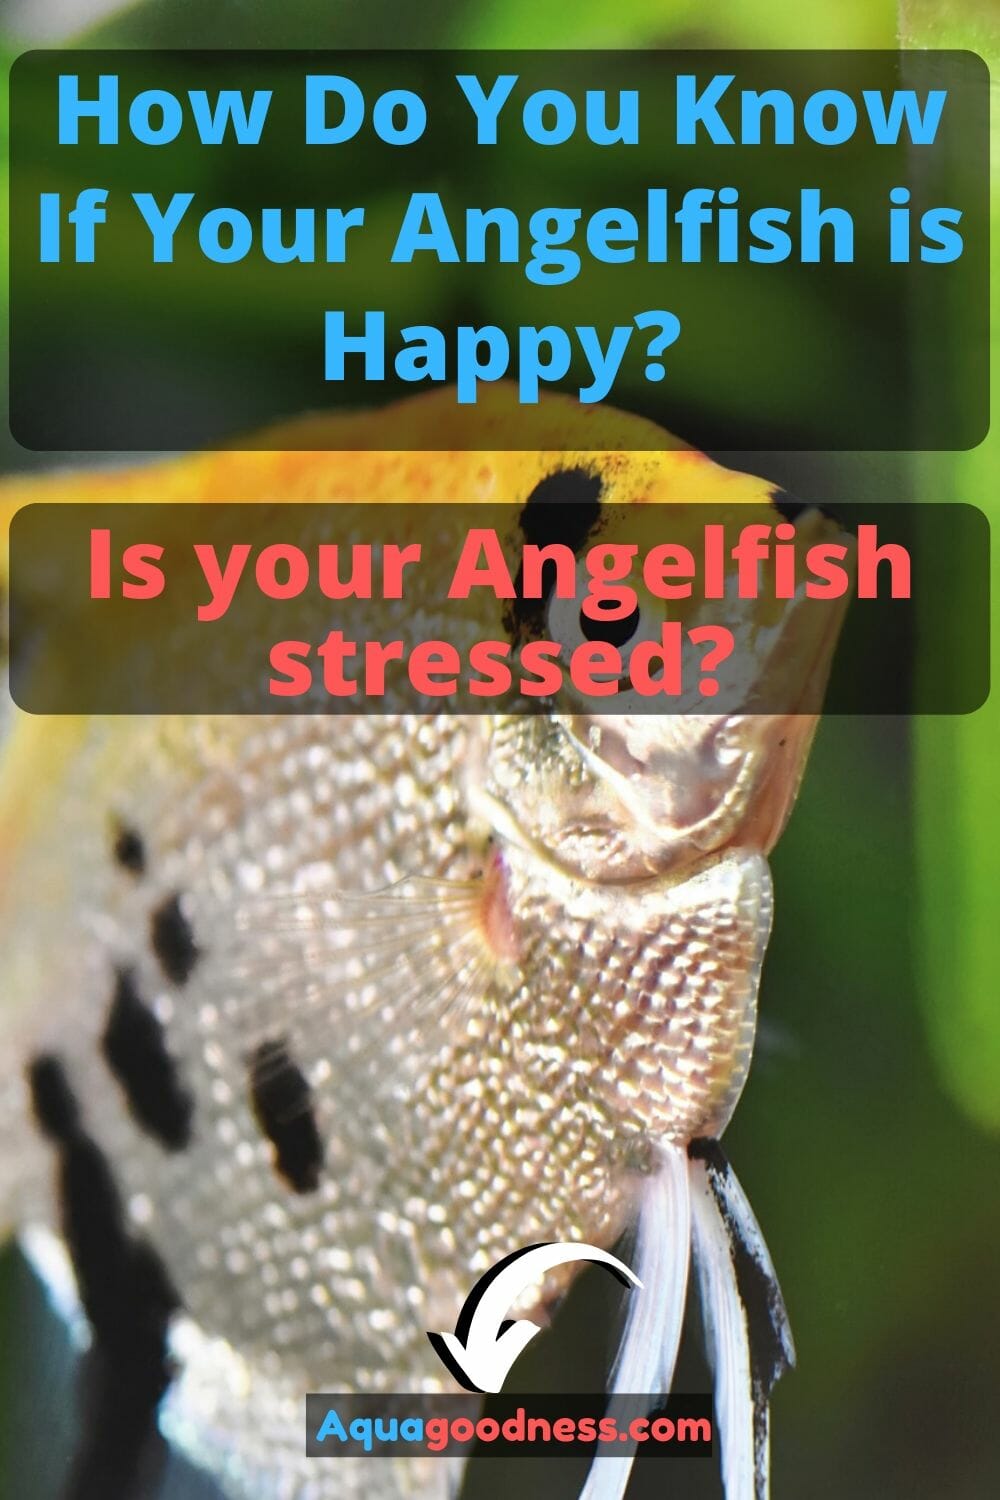 How Do You Know If Your Angelfish is Happy? (Is your Angelfish stressed?)